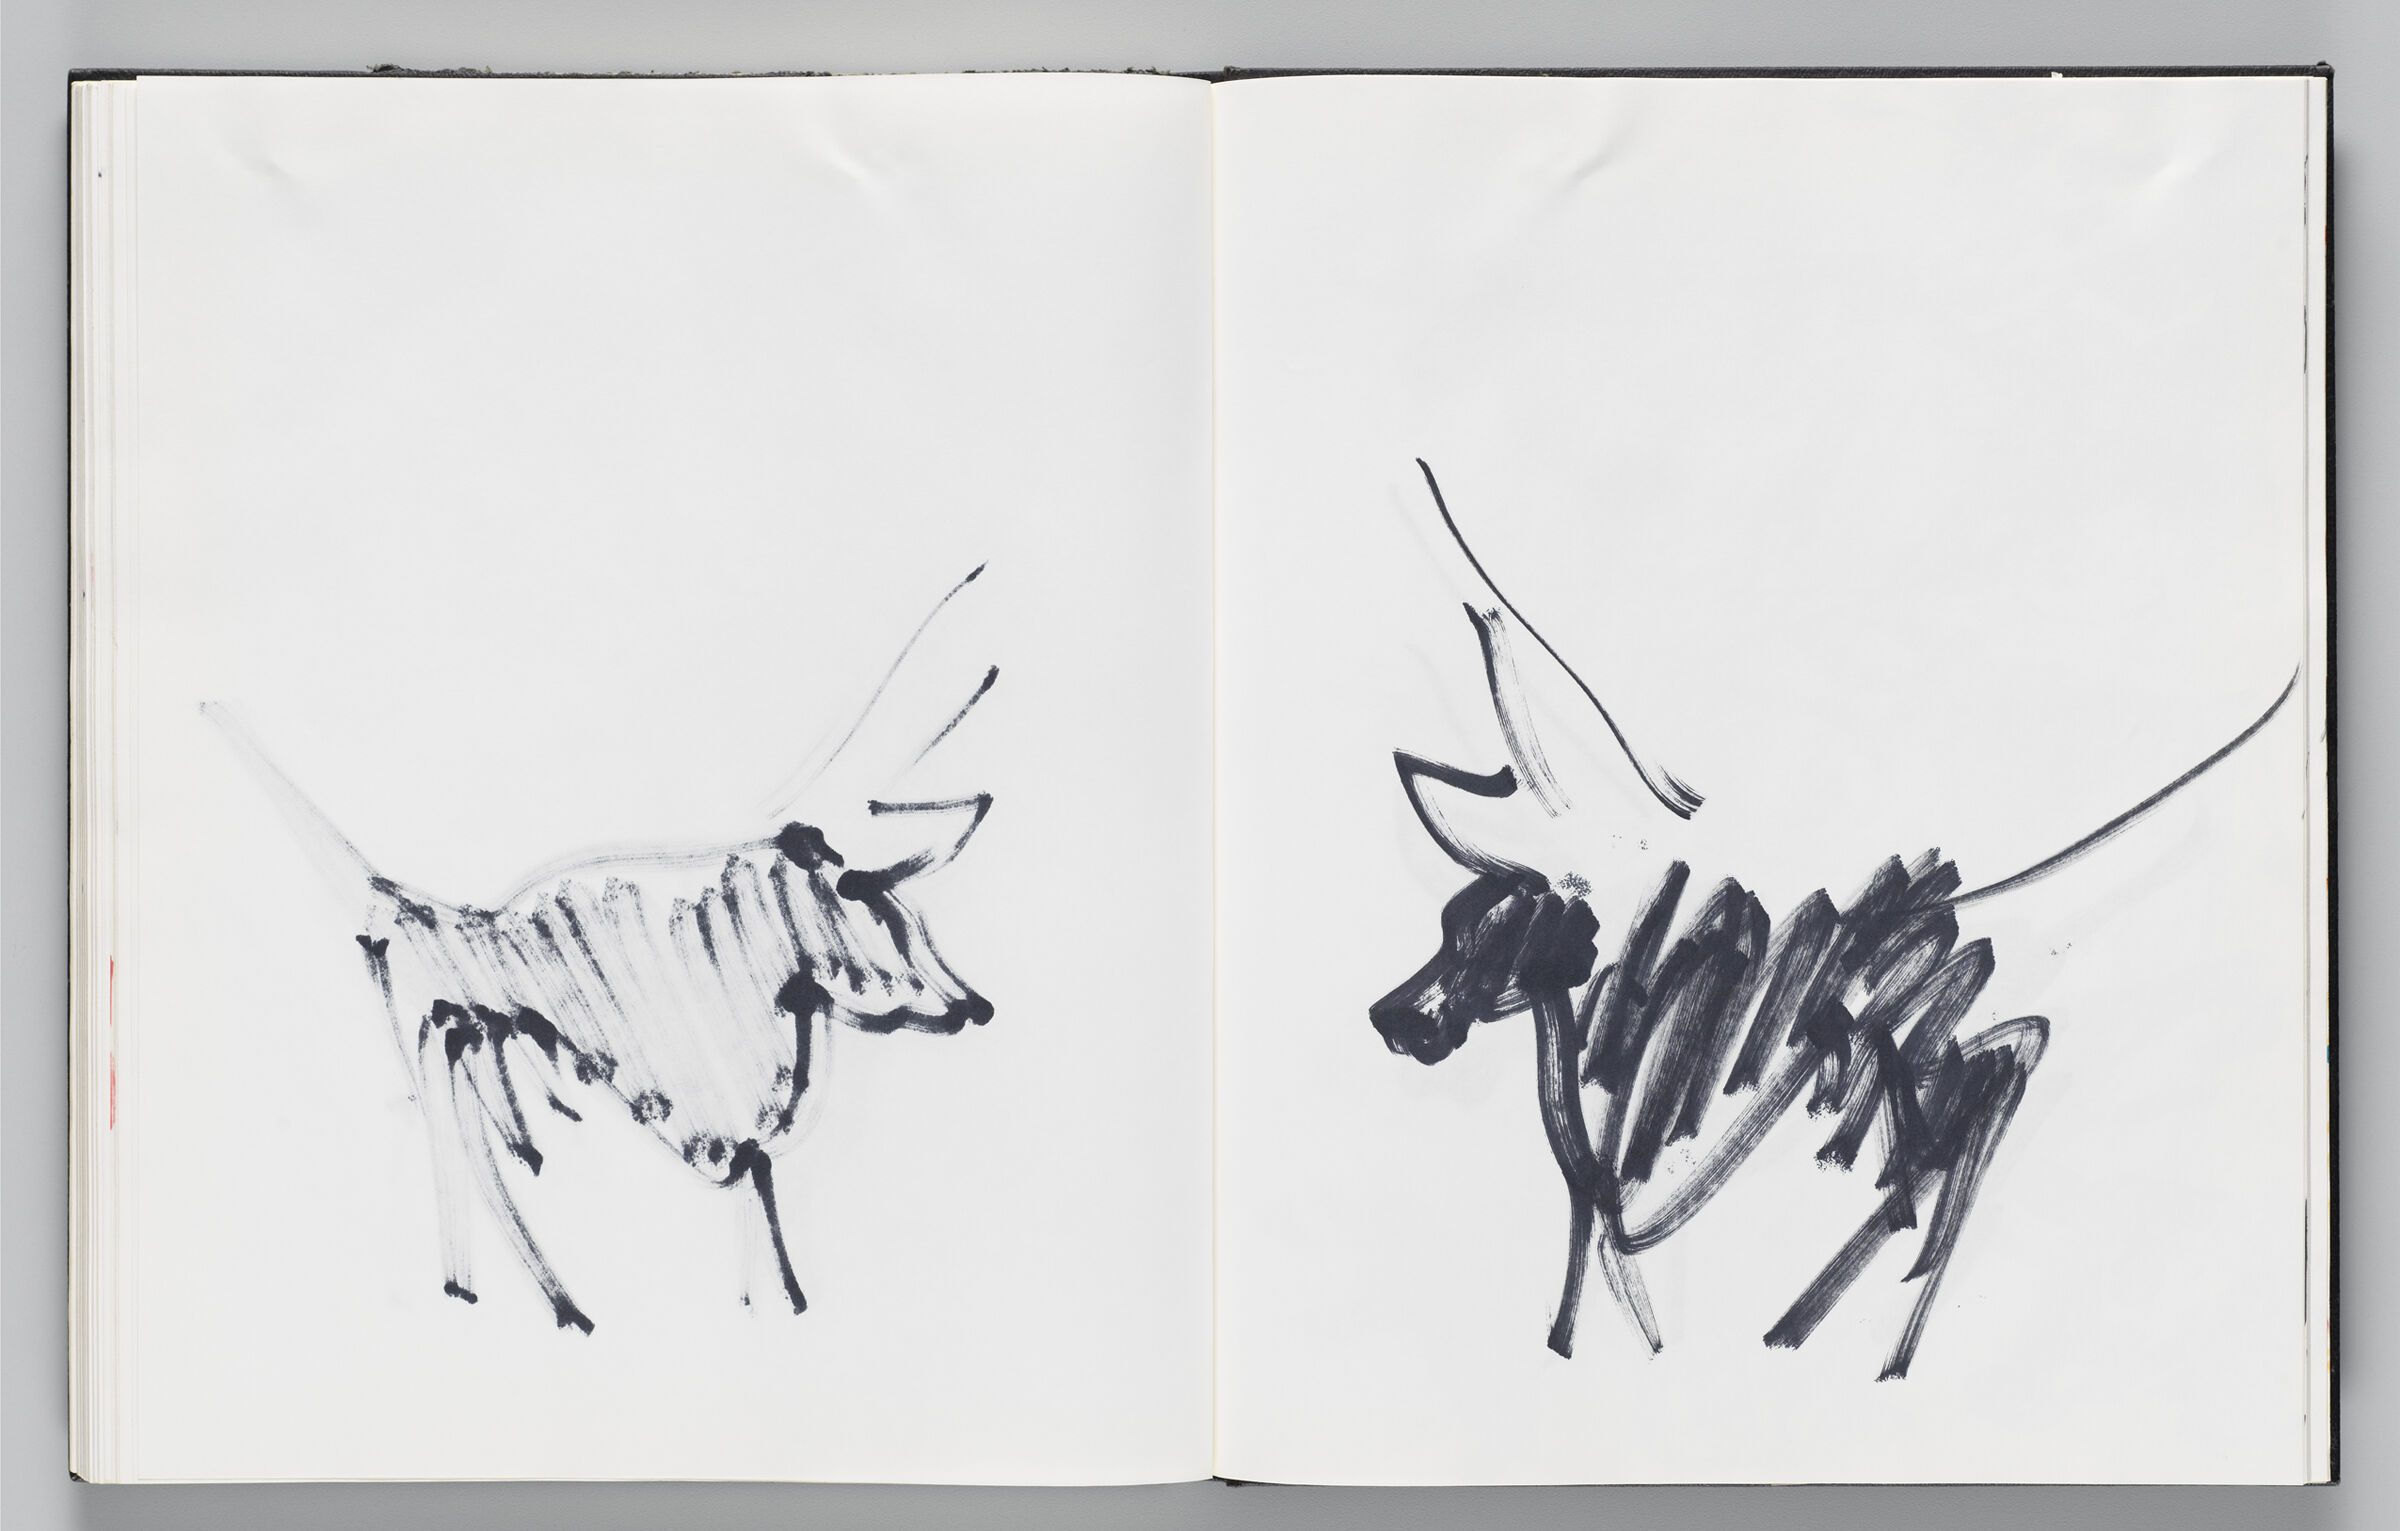 Uuntitled (Bleed-Through Of Previous Page, Left Page); Untitled (Minatour In Profile With Faint Color Transfer, Right Page)